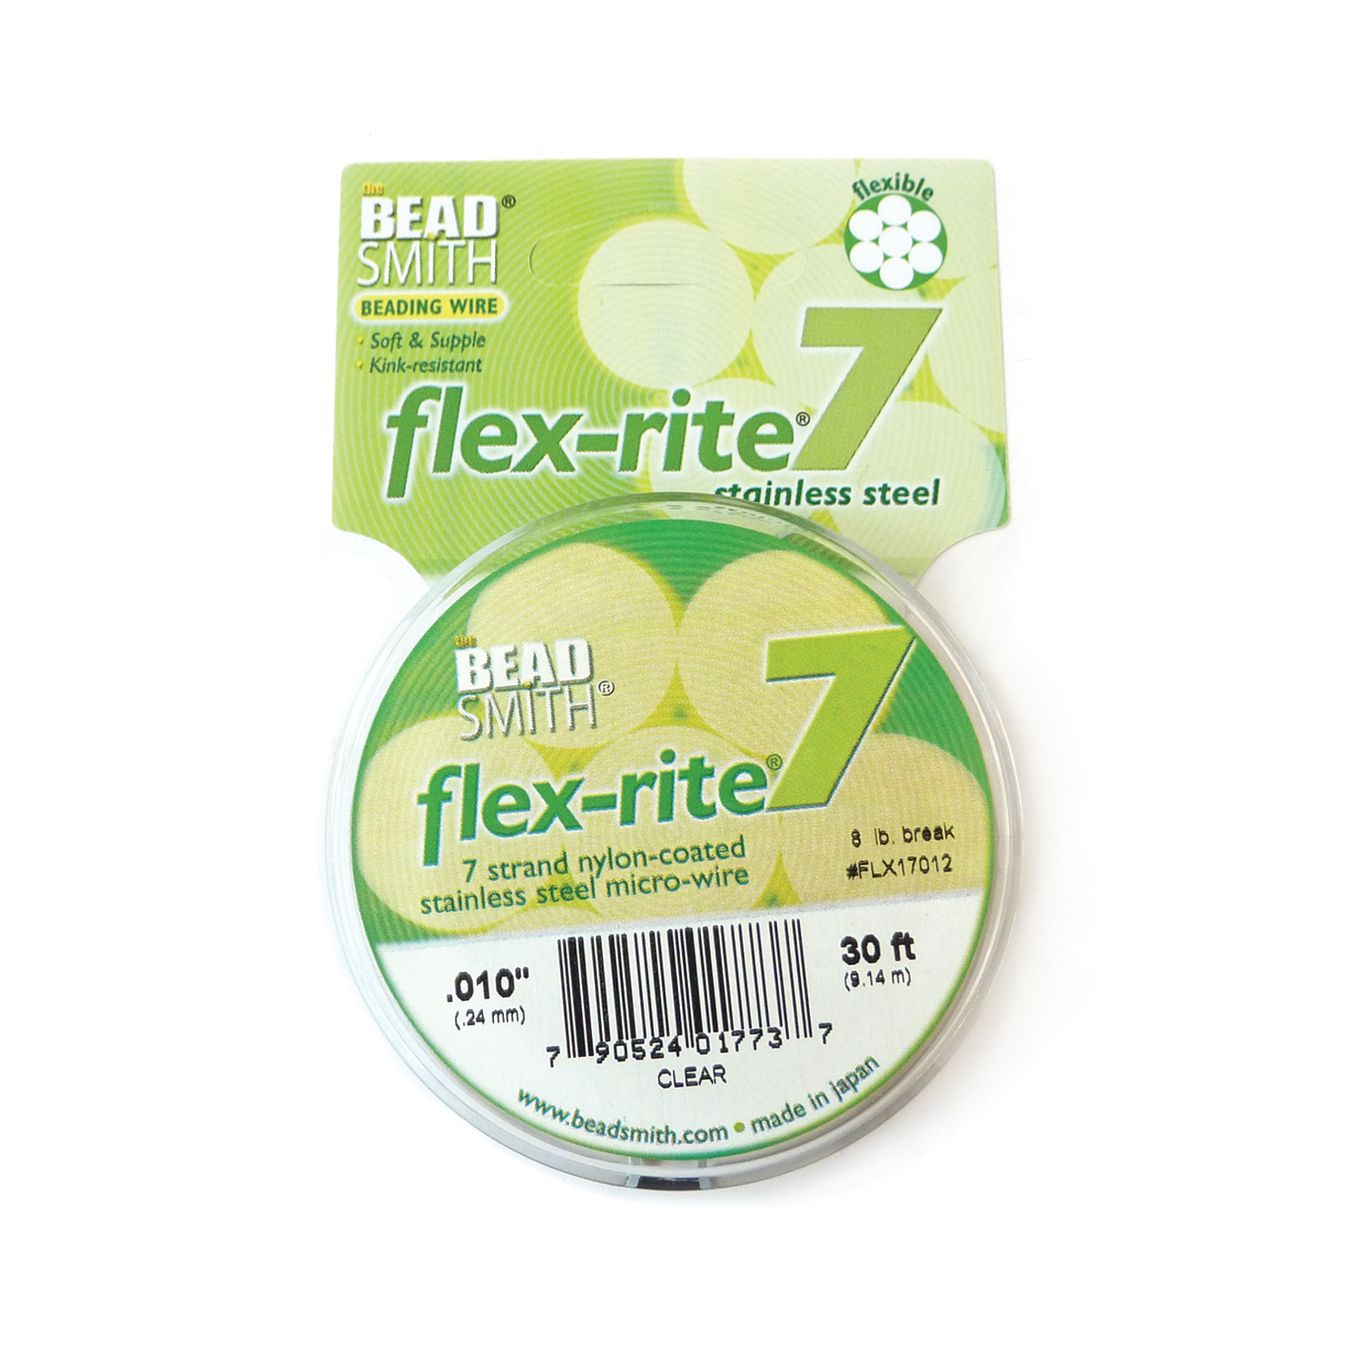 How To Use Flex-Rite Jewellery Wire